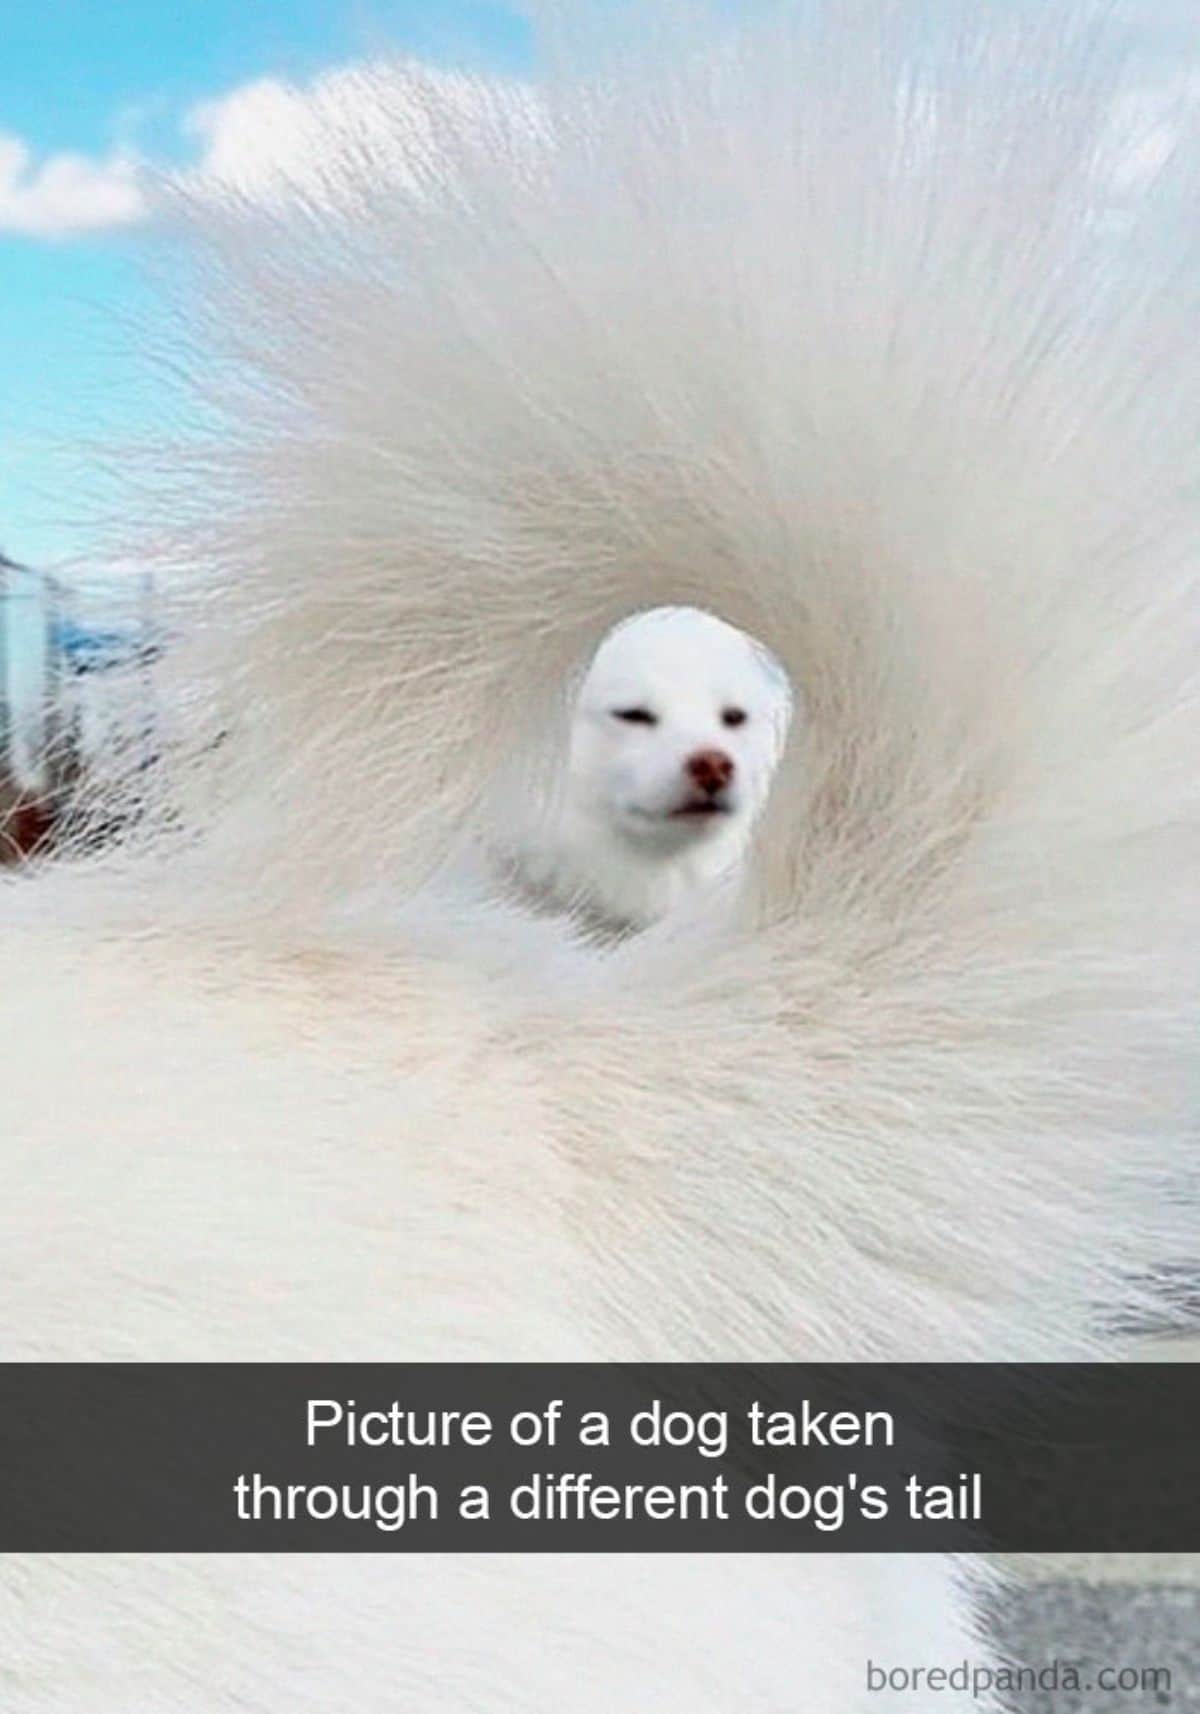 white dog's face seen through the hole made by another dog's fluffy tail curling with a caption saying picture of a dog taken through a different dog's tail